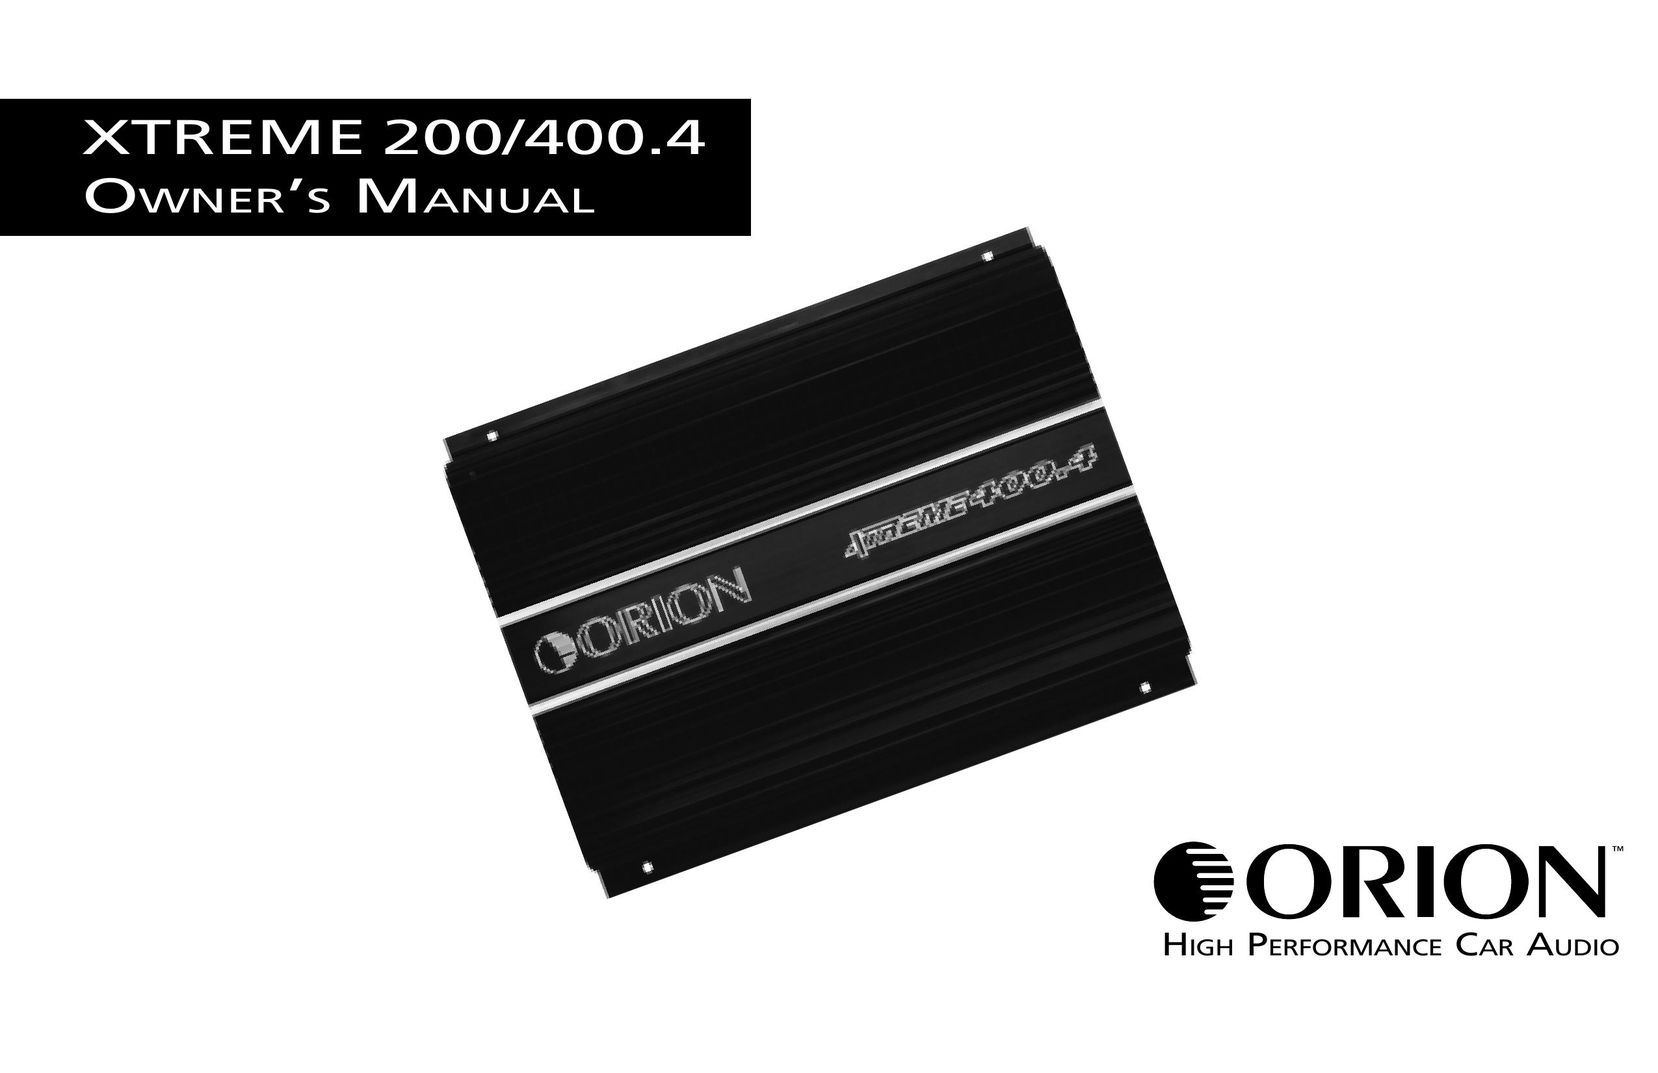 Orion Car Audio 200 Car Stereo System User Manual